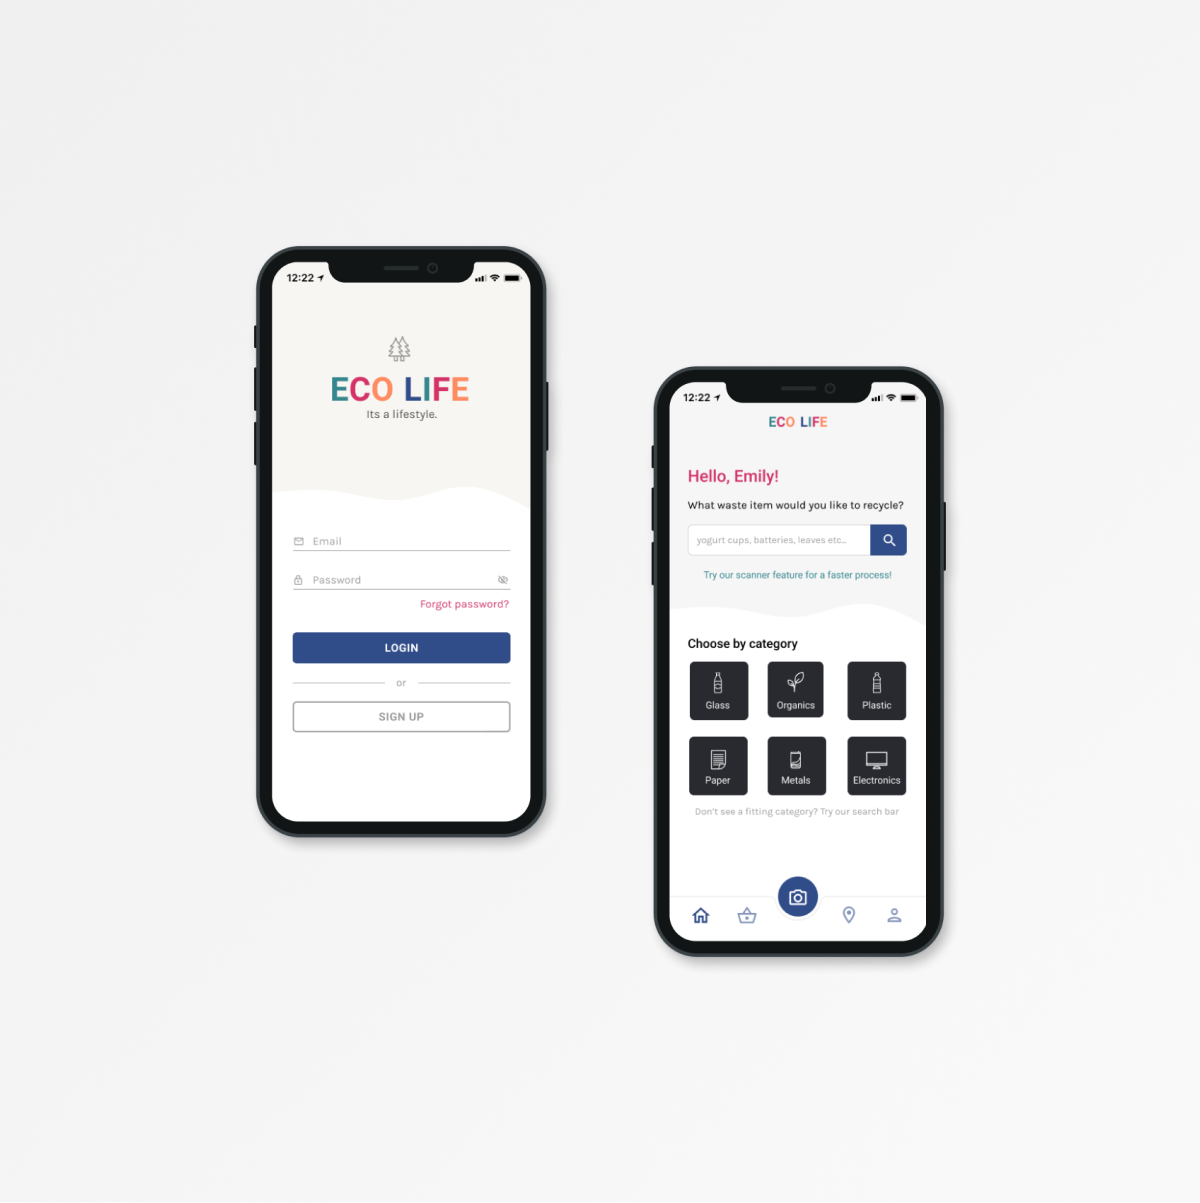 eco life login page and home page on mobile device